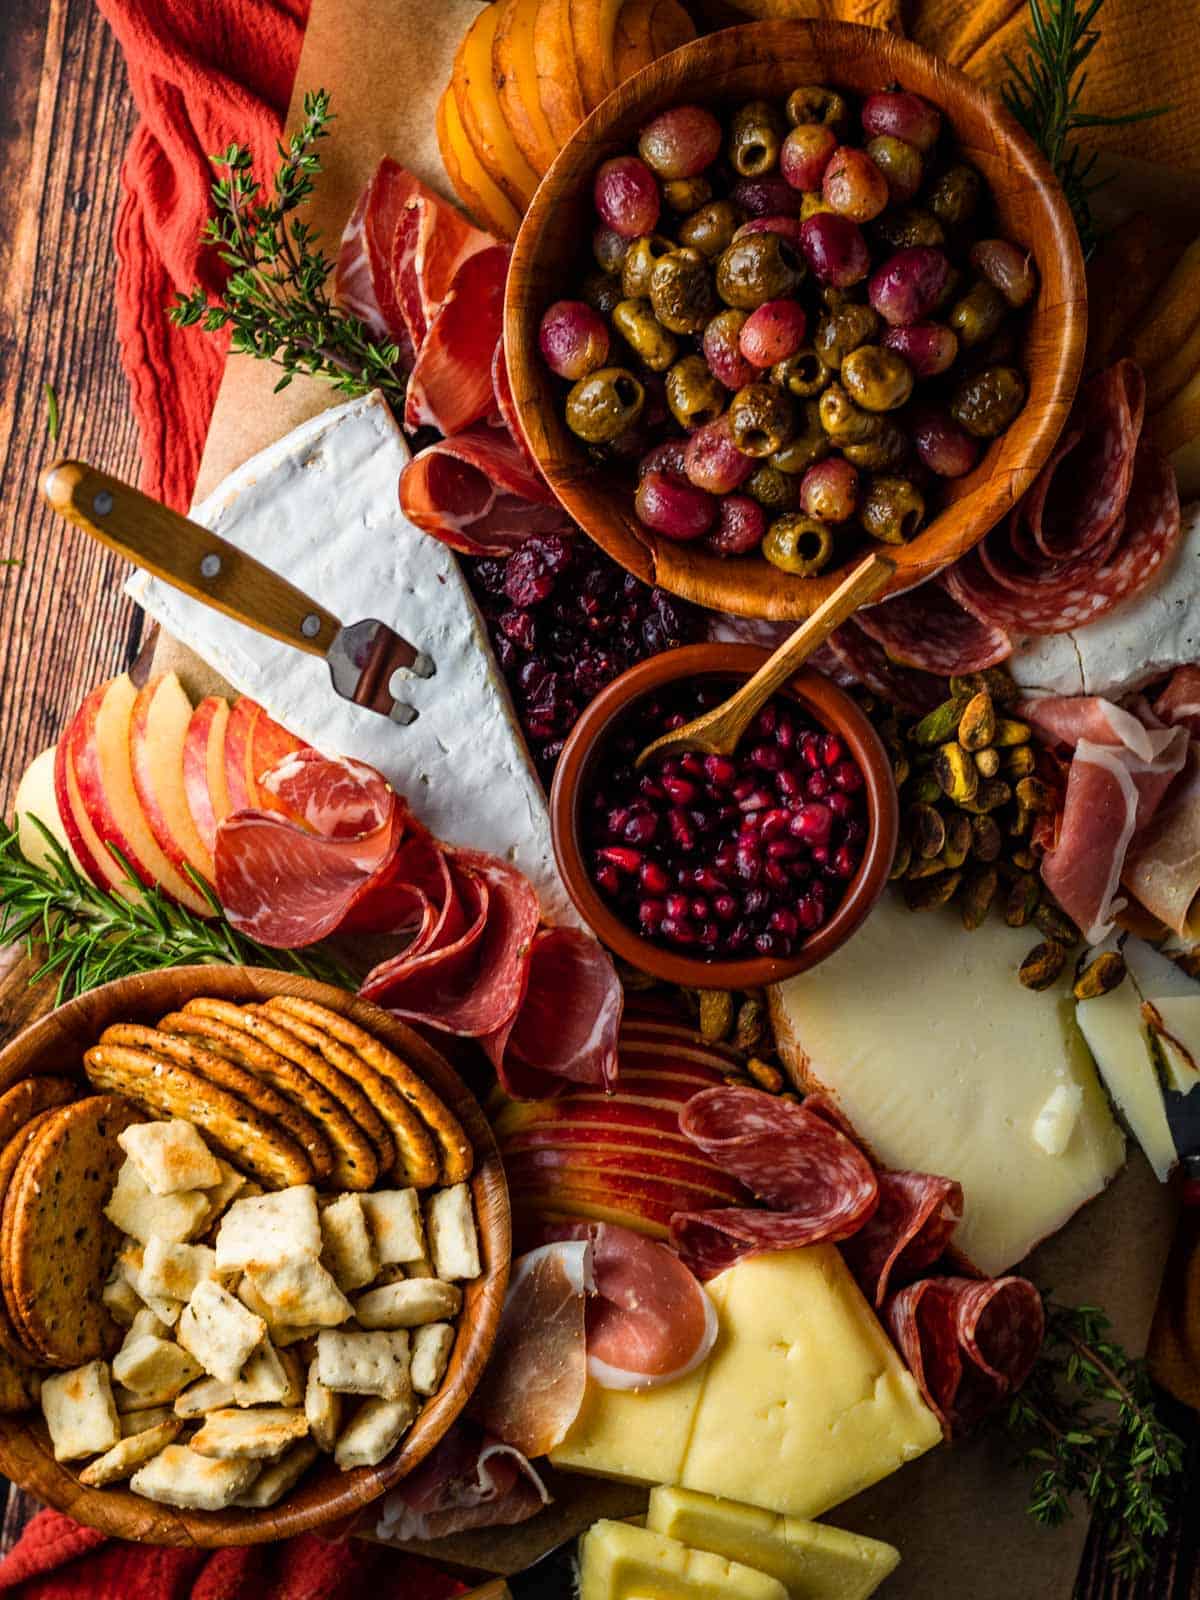 A rectangular meat and cheese board accented with olives and crackers.